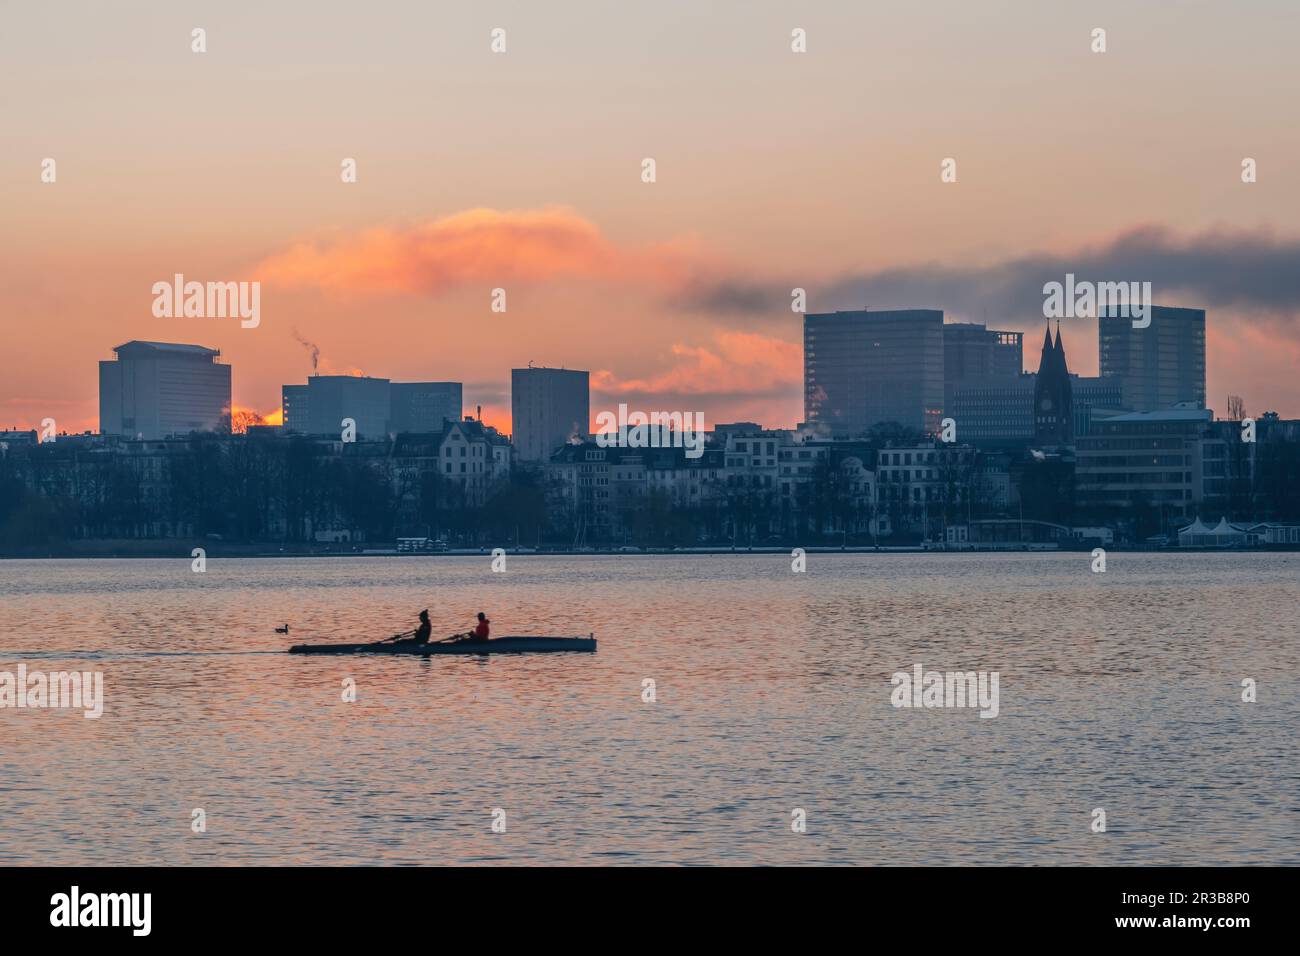 Germany, Hamburg, Alster Lake at dawn with city skyline and rowing boat in background Stock Photo